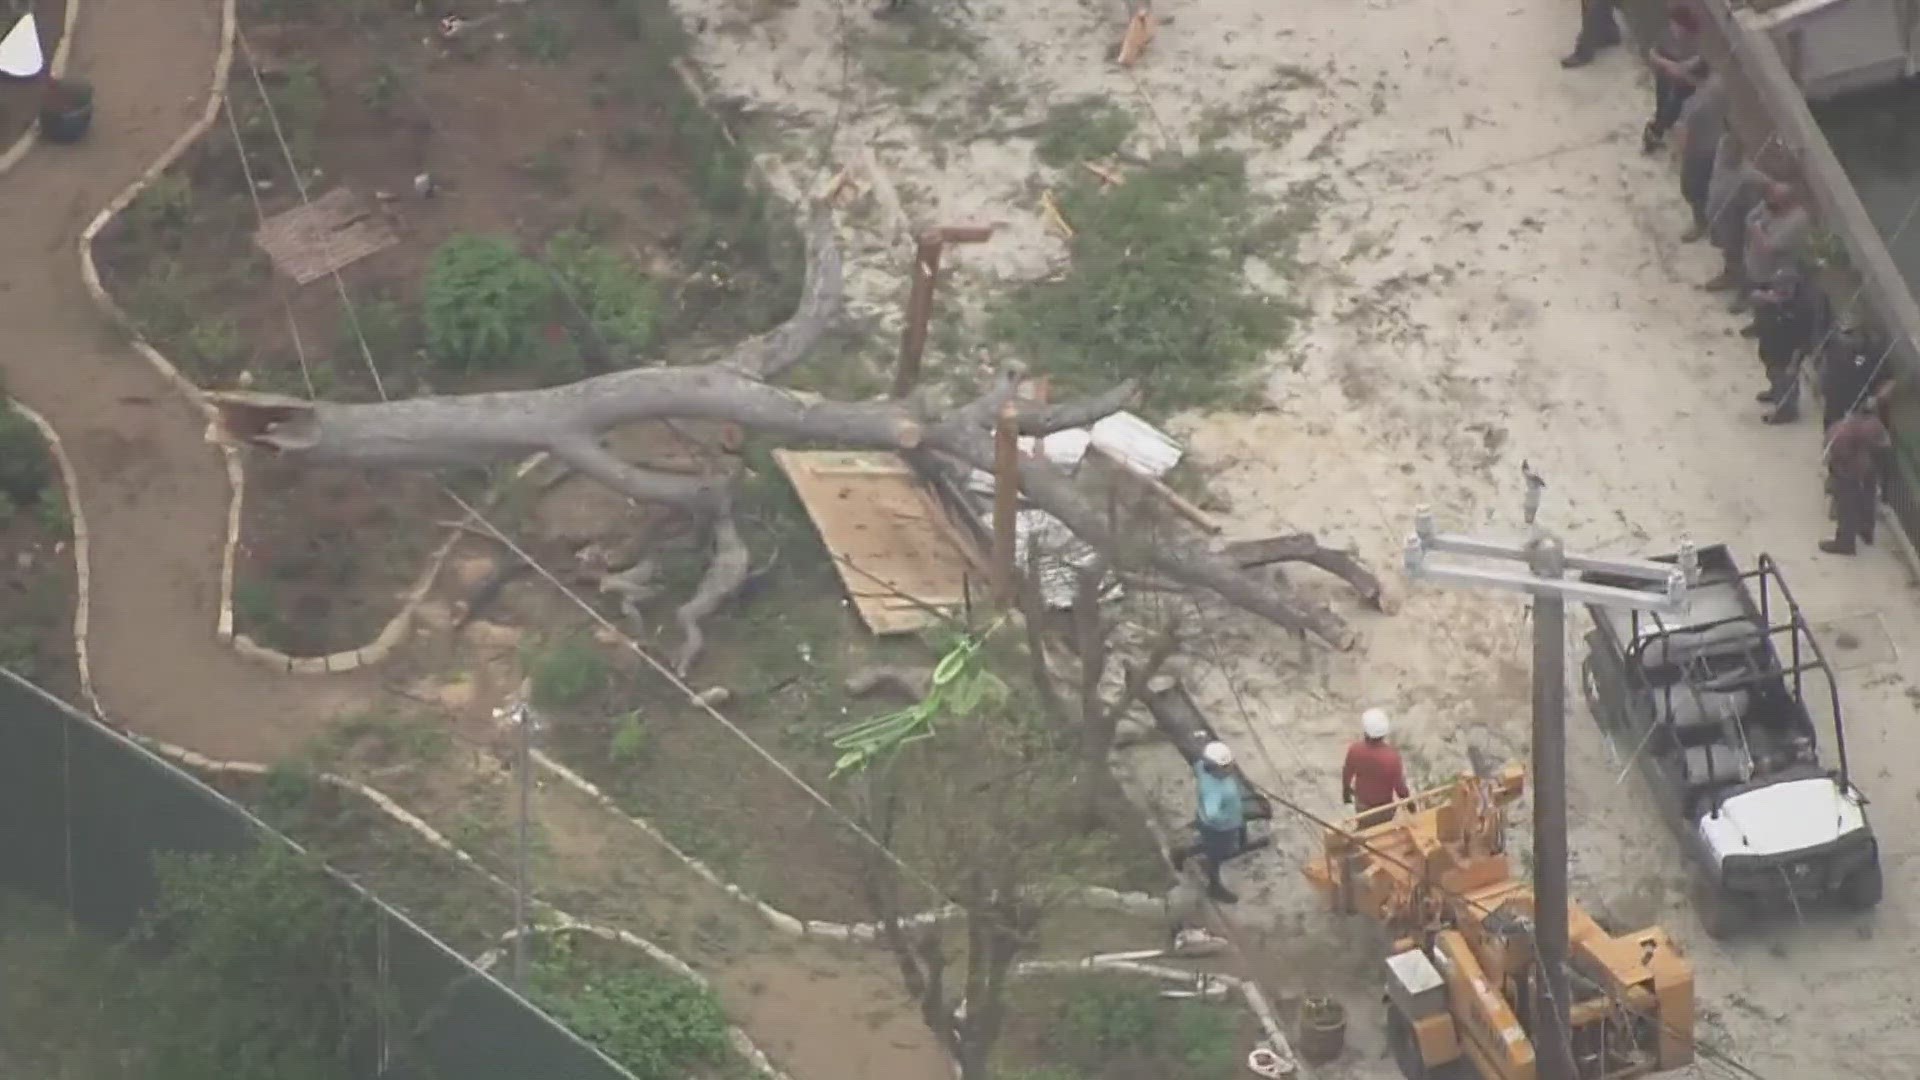 San Antonio zoo officials are calling the incident an "unfortunate freak accident."